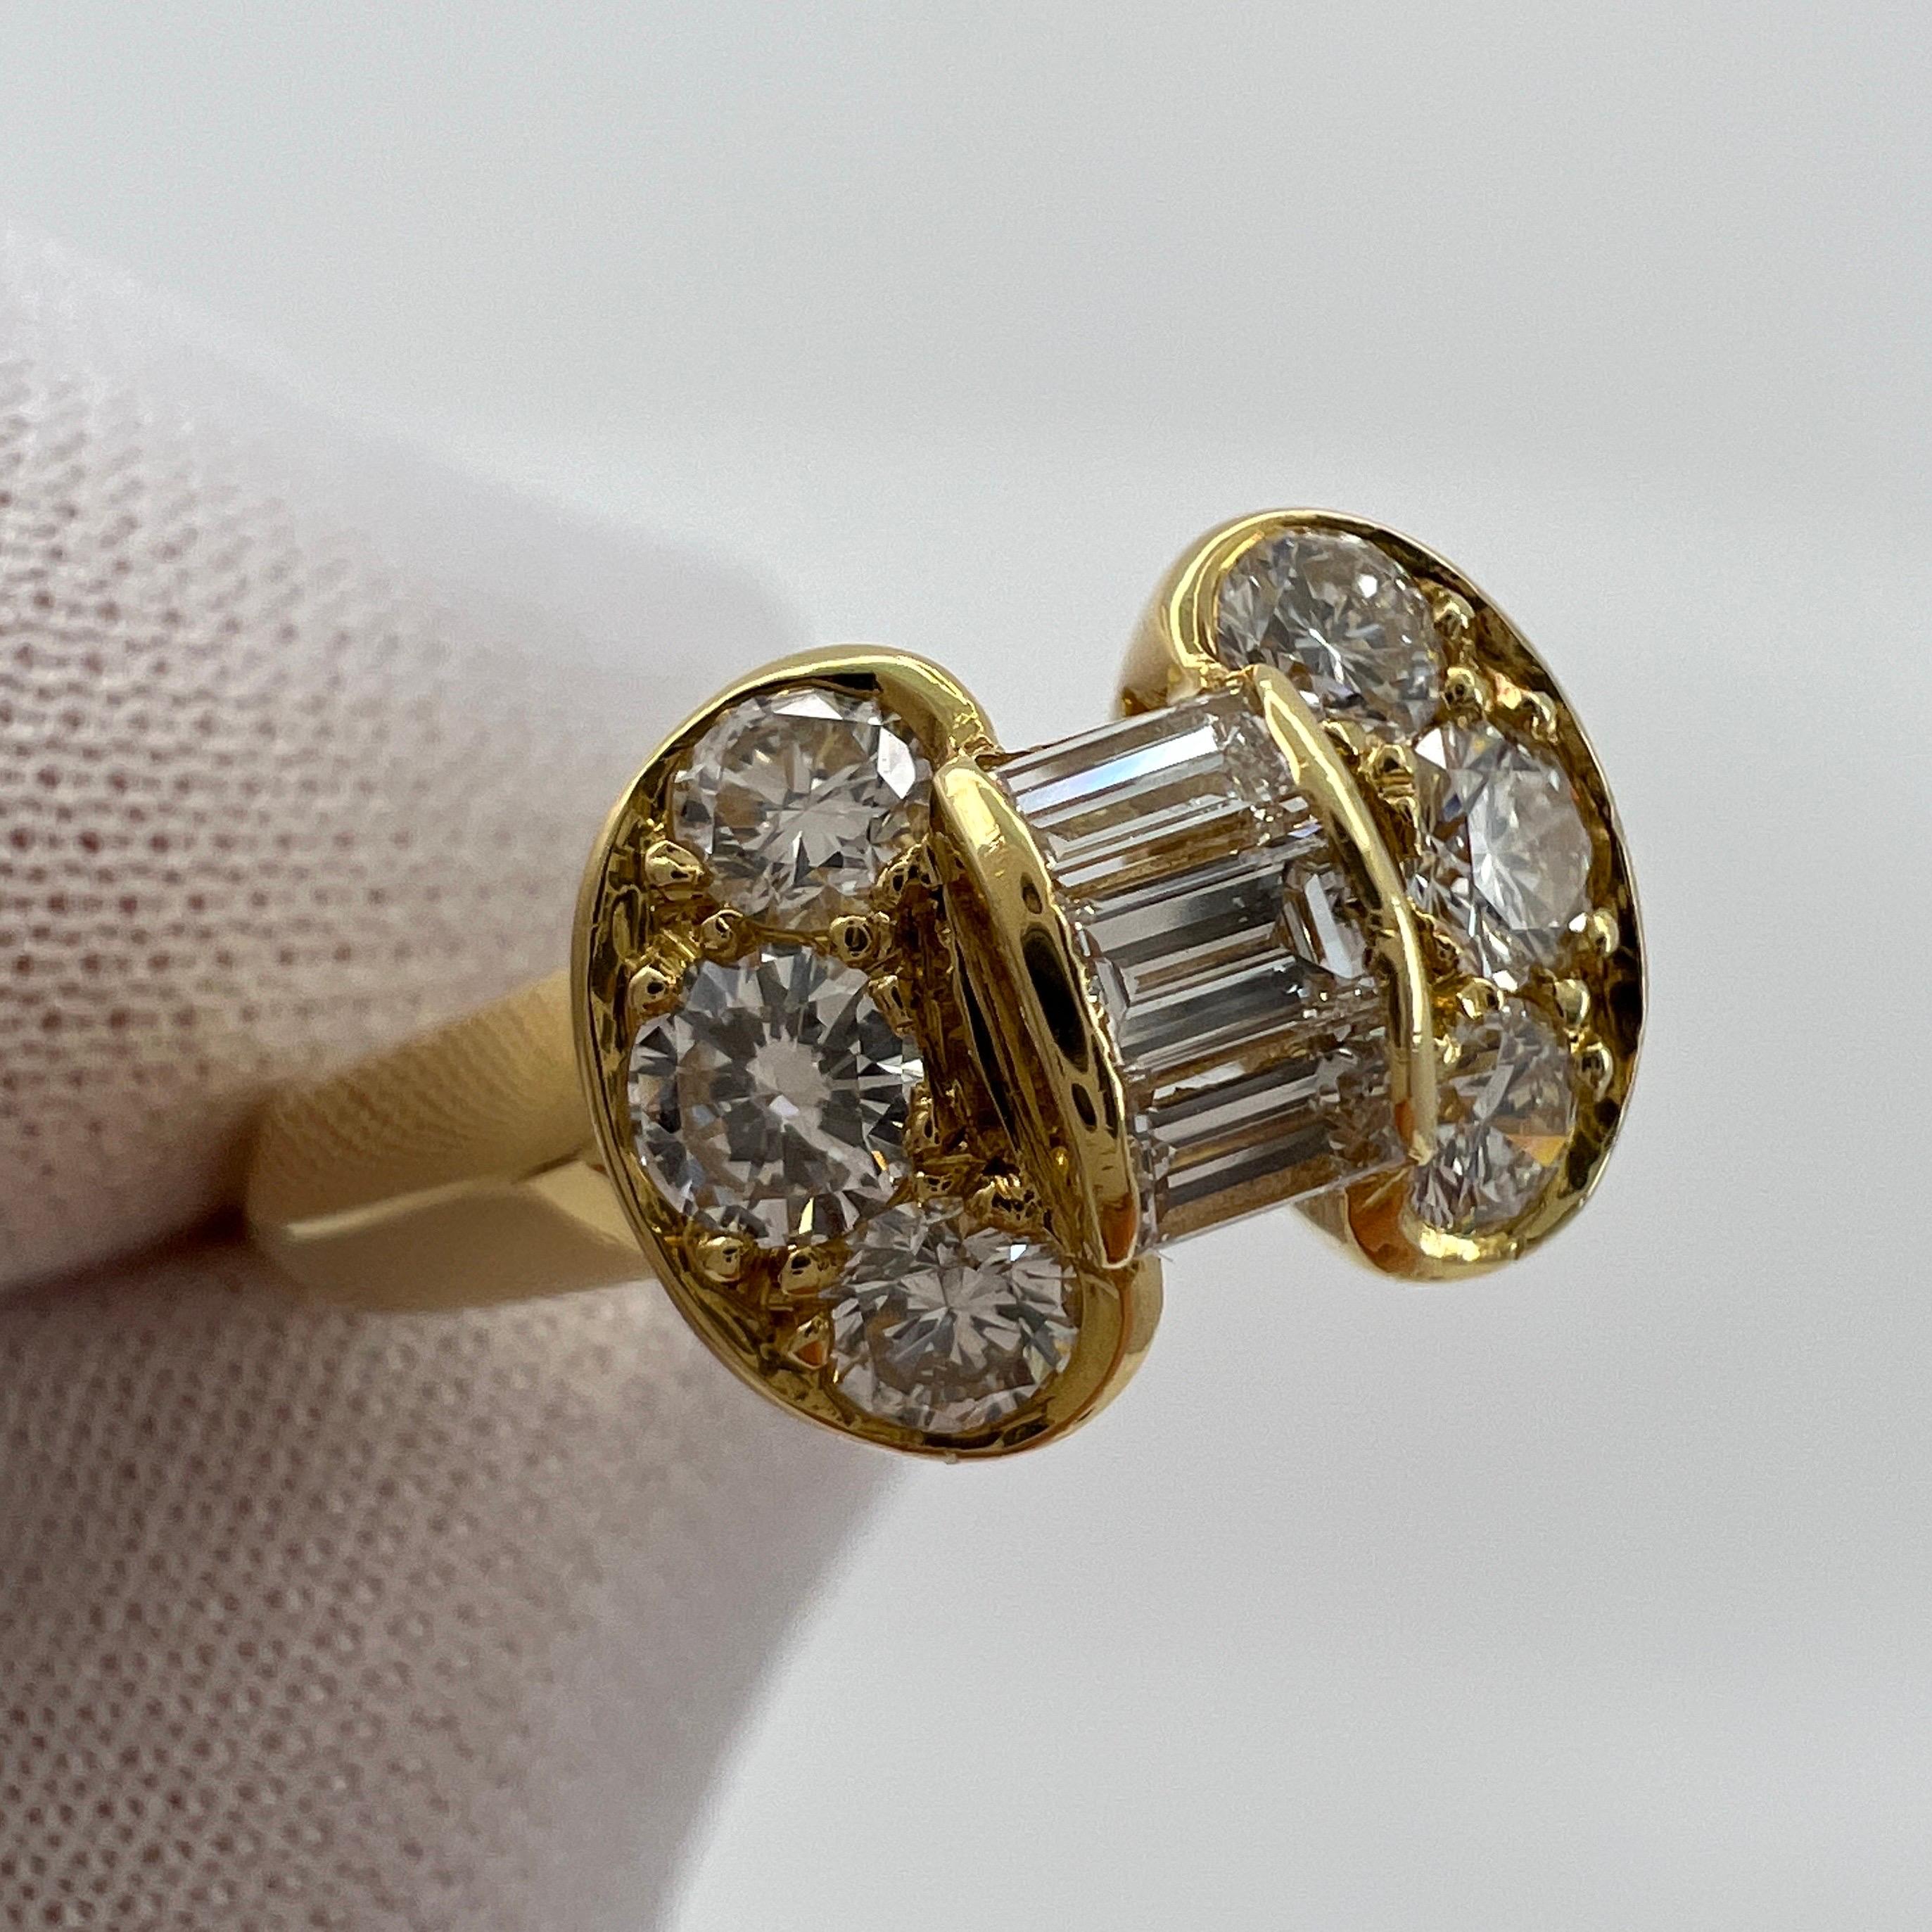 Rare Vintage Van Cleef & Arpels Diamond Ribbon 18k Yellow Gold Bow Celeste Ring.

A stunning ring with a unique design typical of Van Cleef & Arpels, set with a beautiful arrangement of top quality white diamonds.
Fine baguette and round brilliant